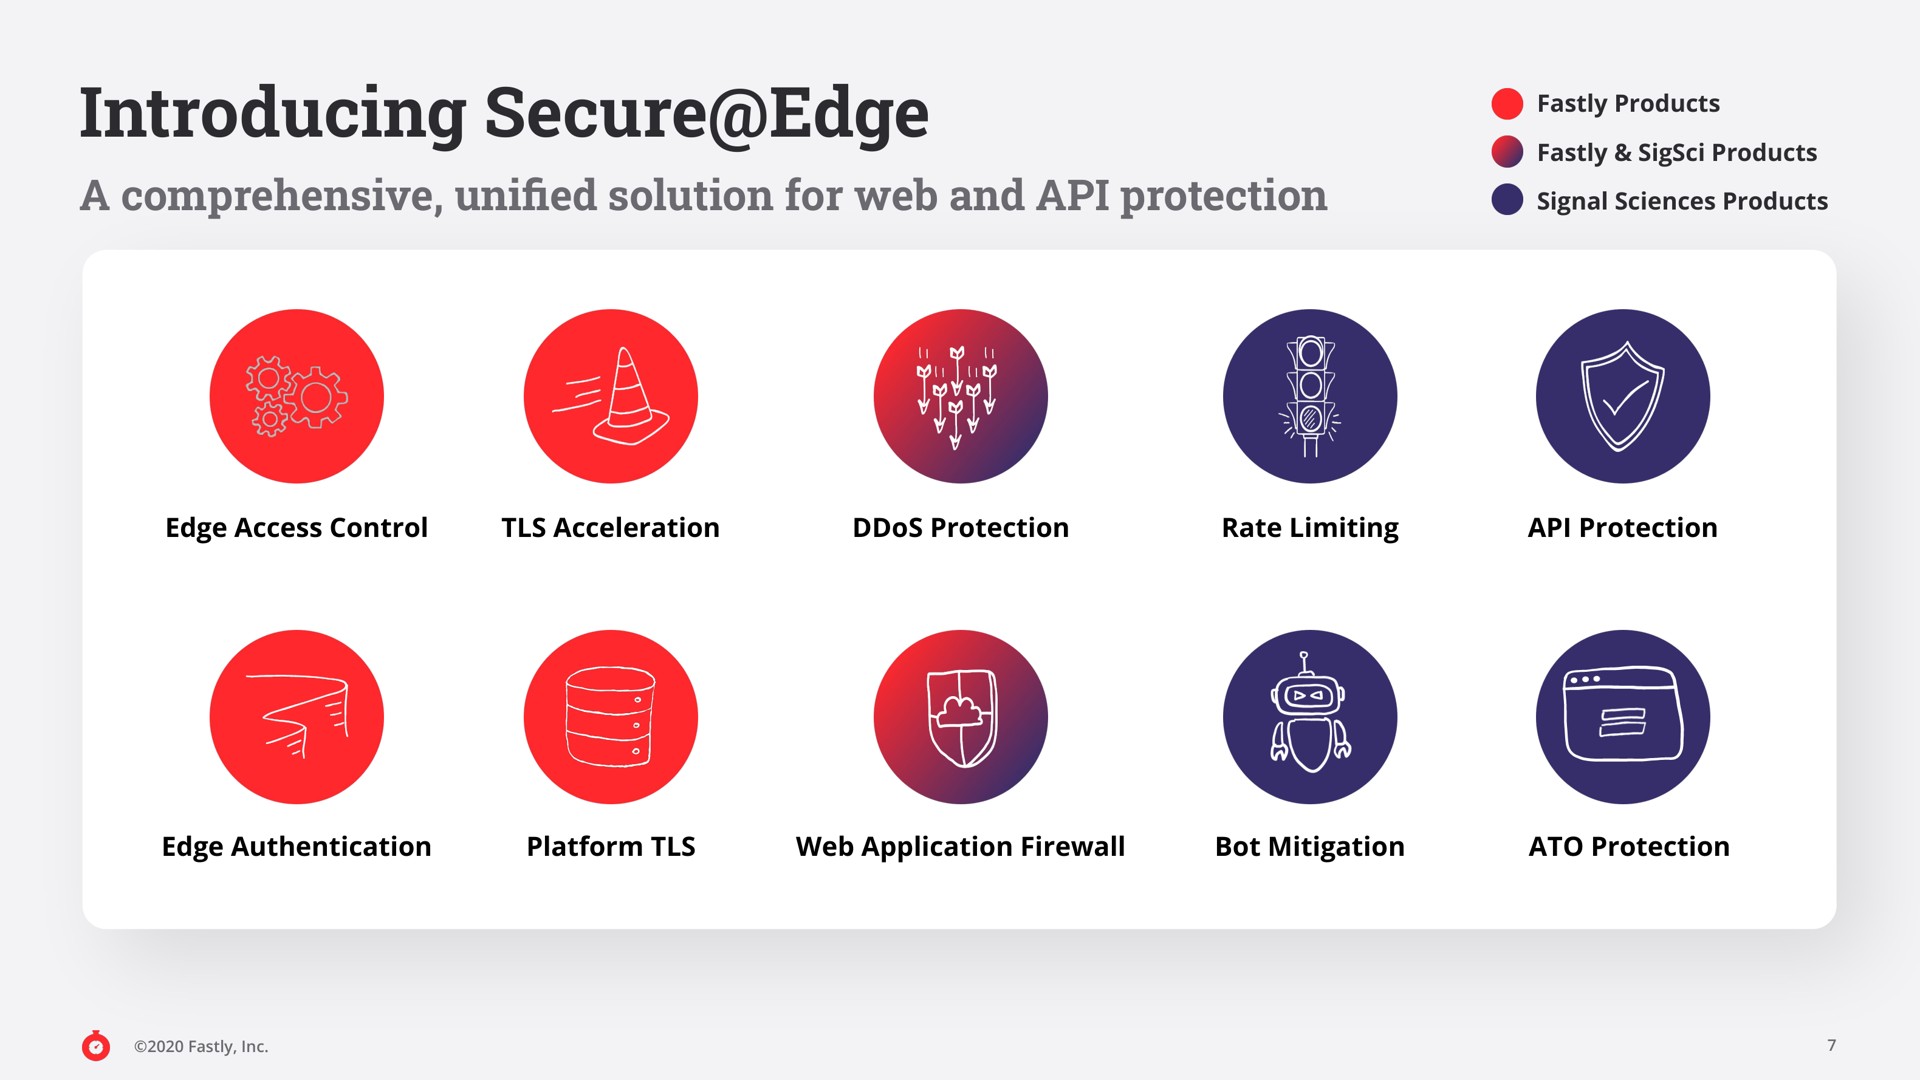 introducing secure edge products | Fastly